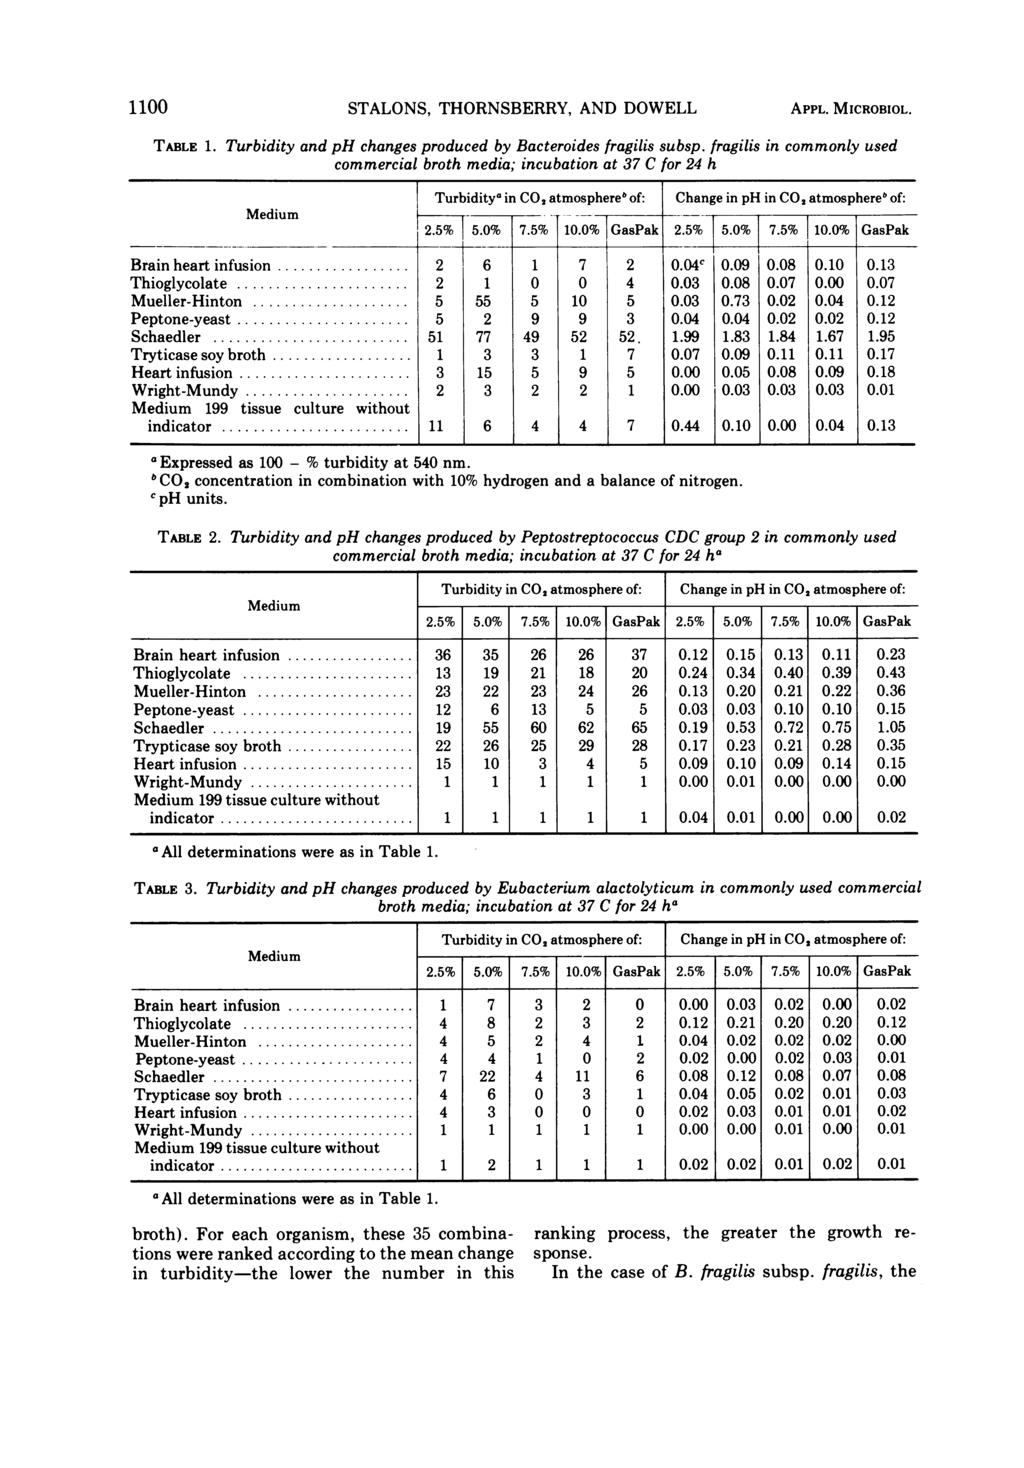 1100 STALONS, THORNSBERRY, AND DOWELL APPL. MICROBIOL. TABLE 1. Turbidity and ph changes produced by Bacteroides fragilis subsp.